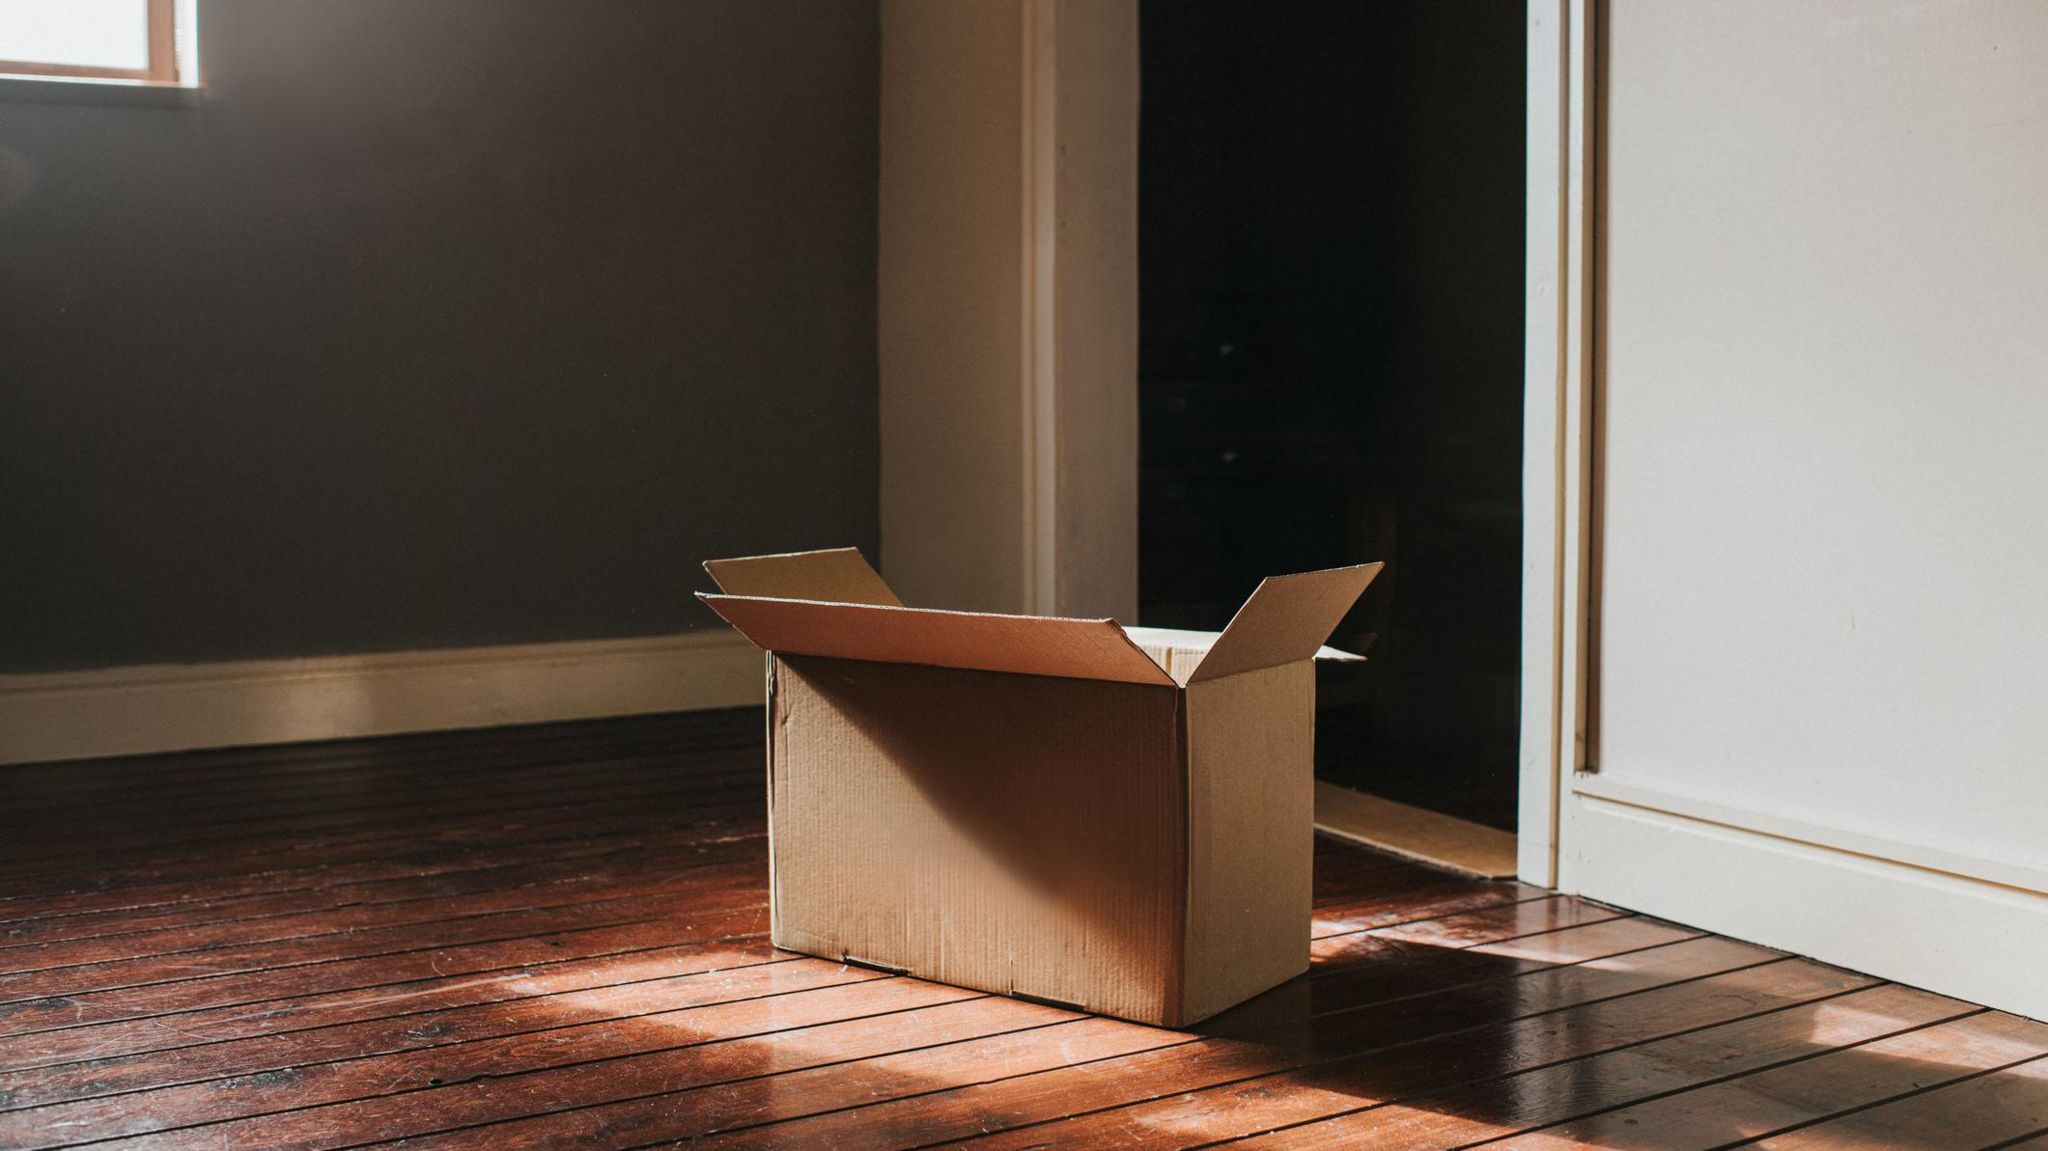 A cardboard moving box on the floor of an empty room